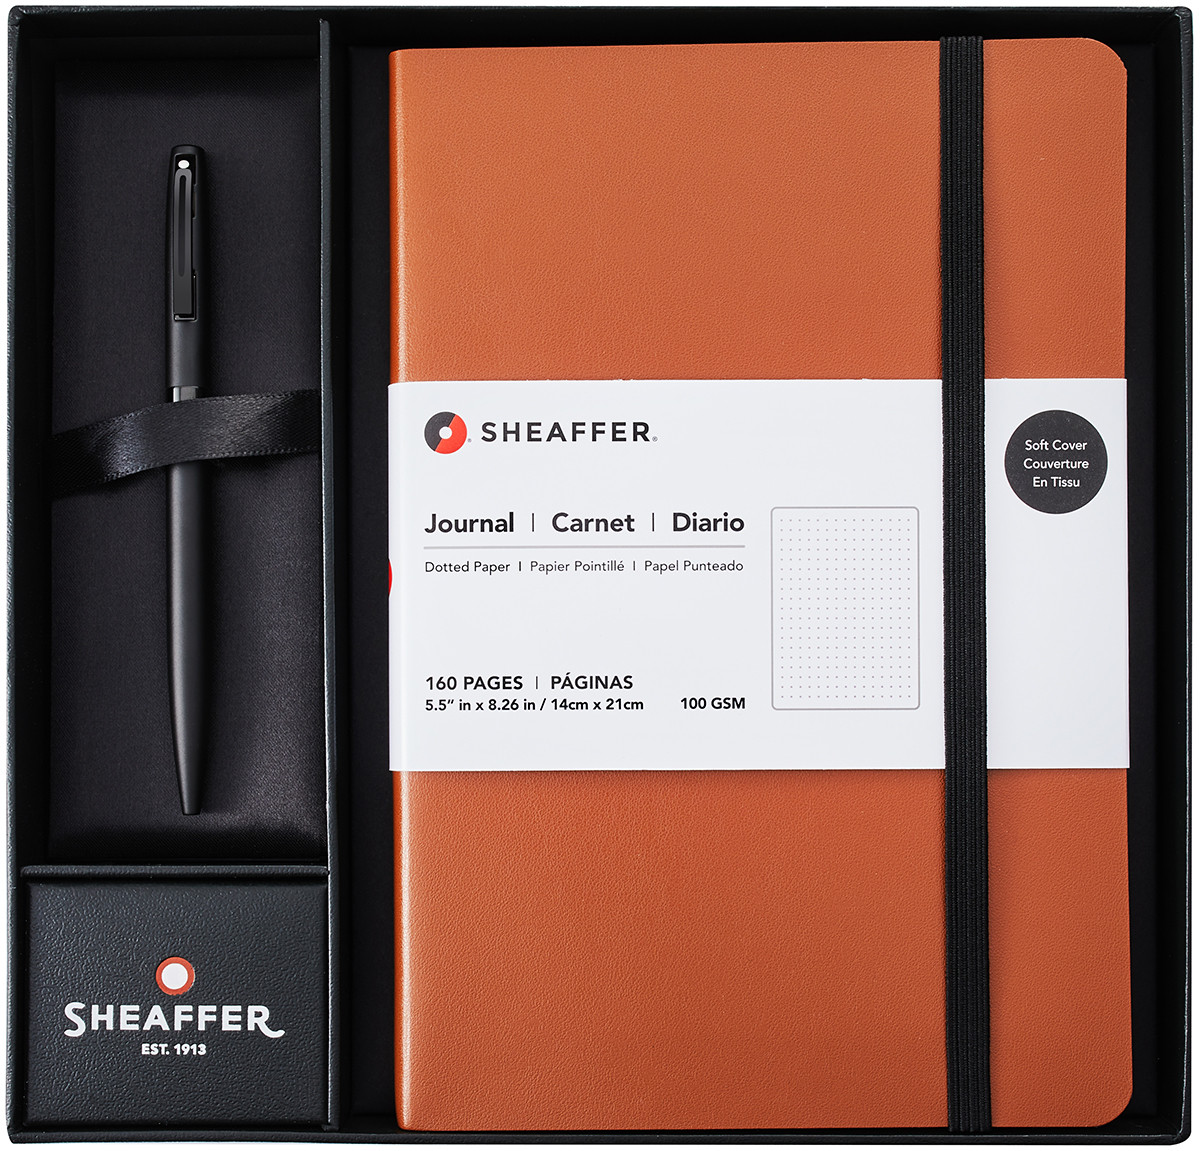 Sheaffer Reminder Ballpoint Pen - Matte Black Lacquer with Free Tan Journal